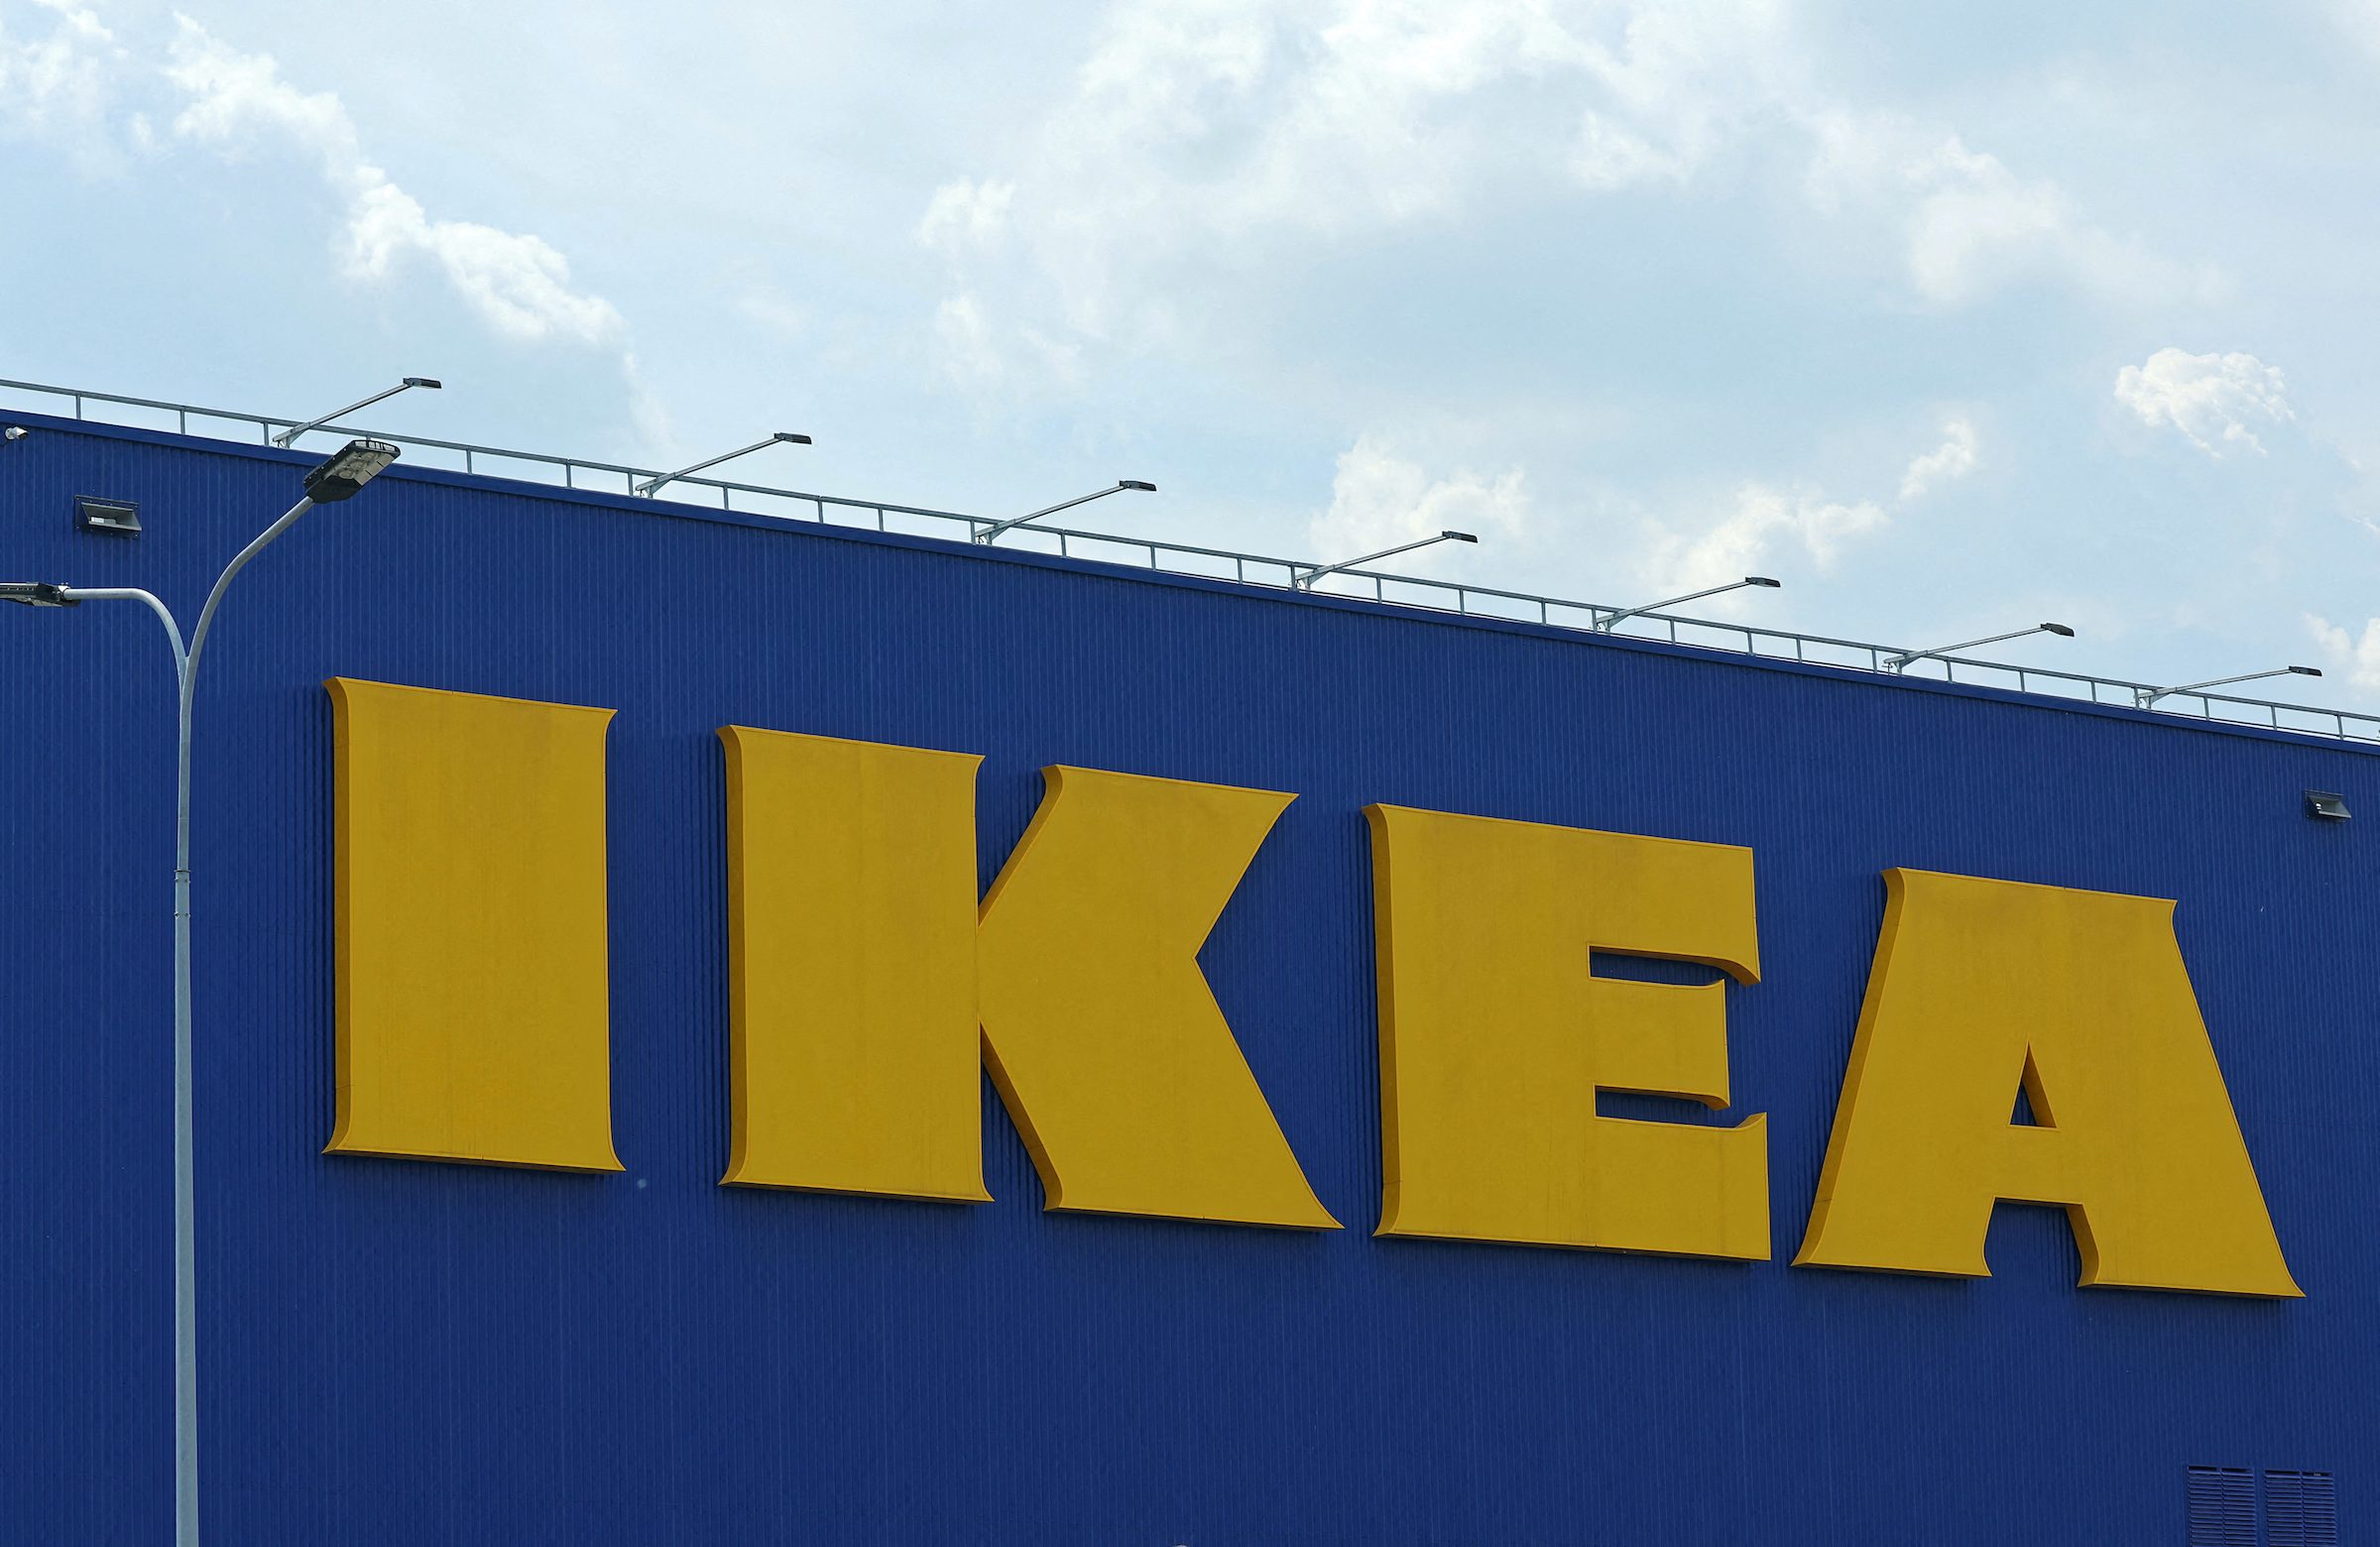 Russian government approves sale of IKEA factories – deputy minister